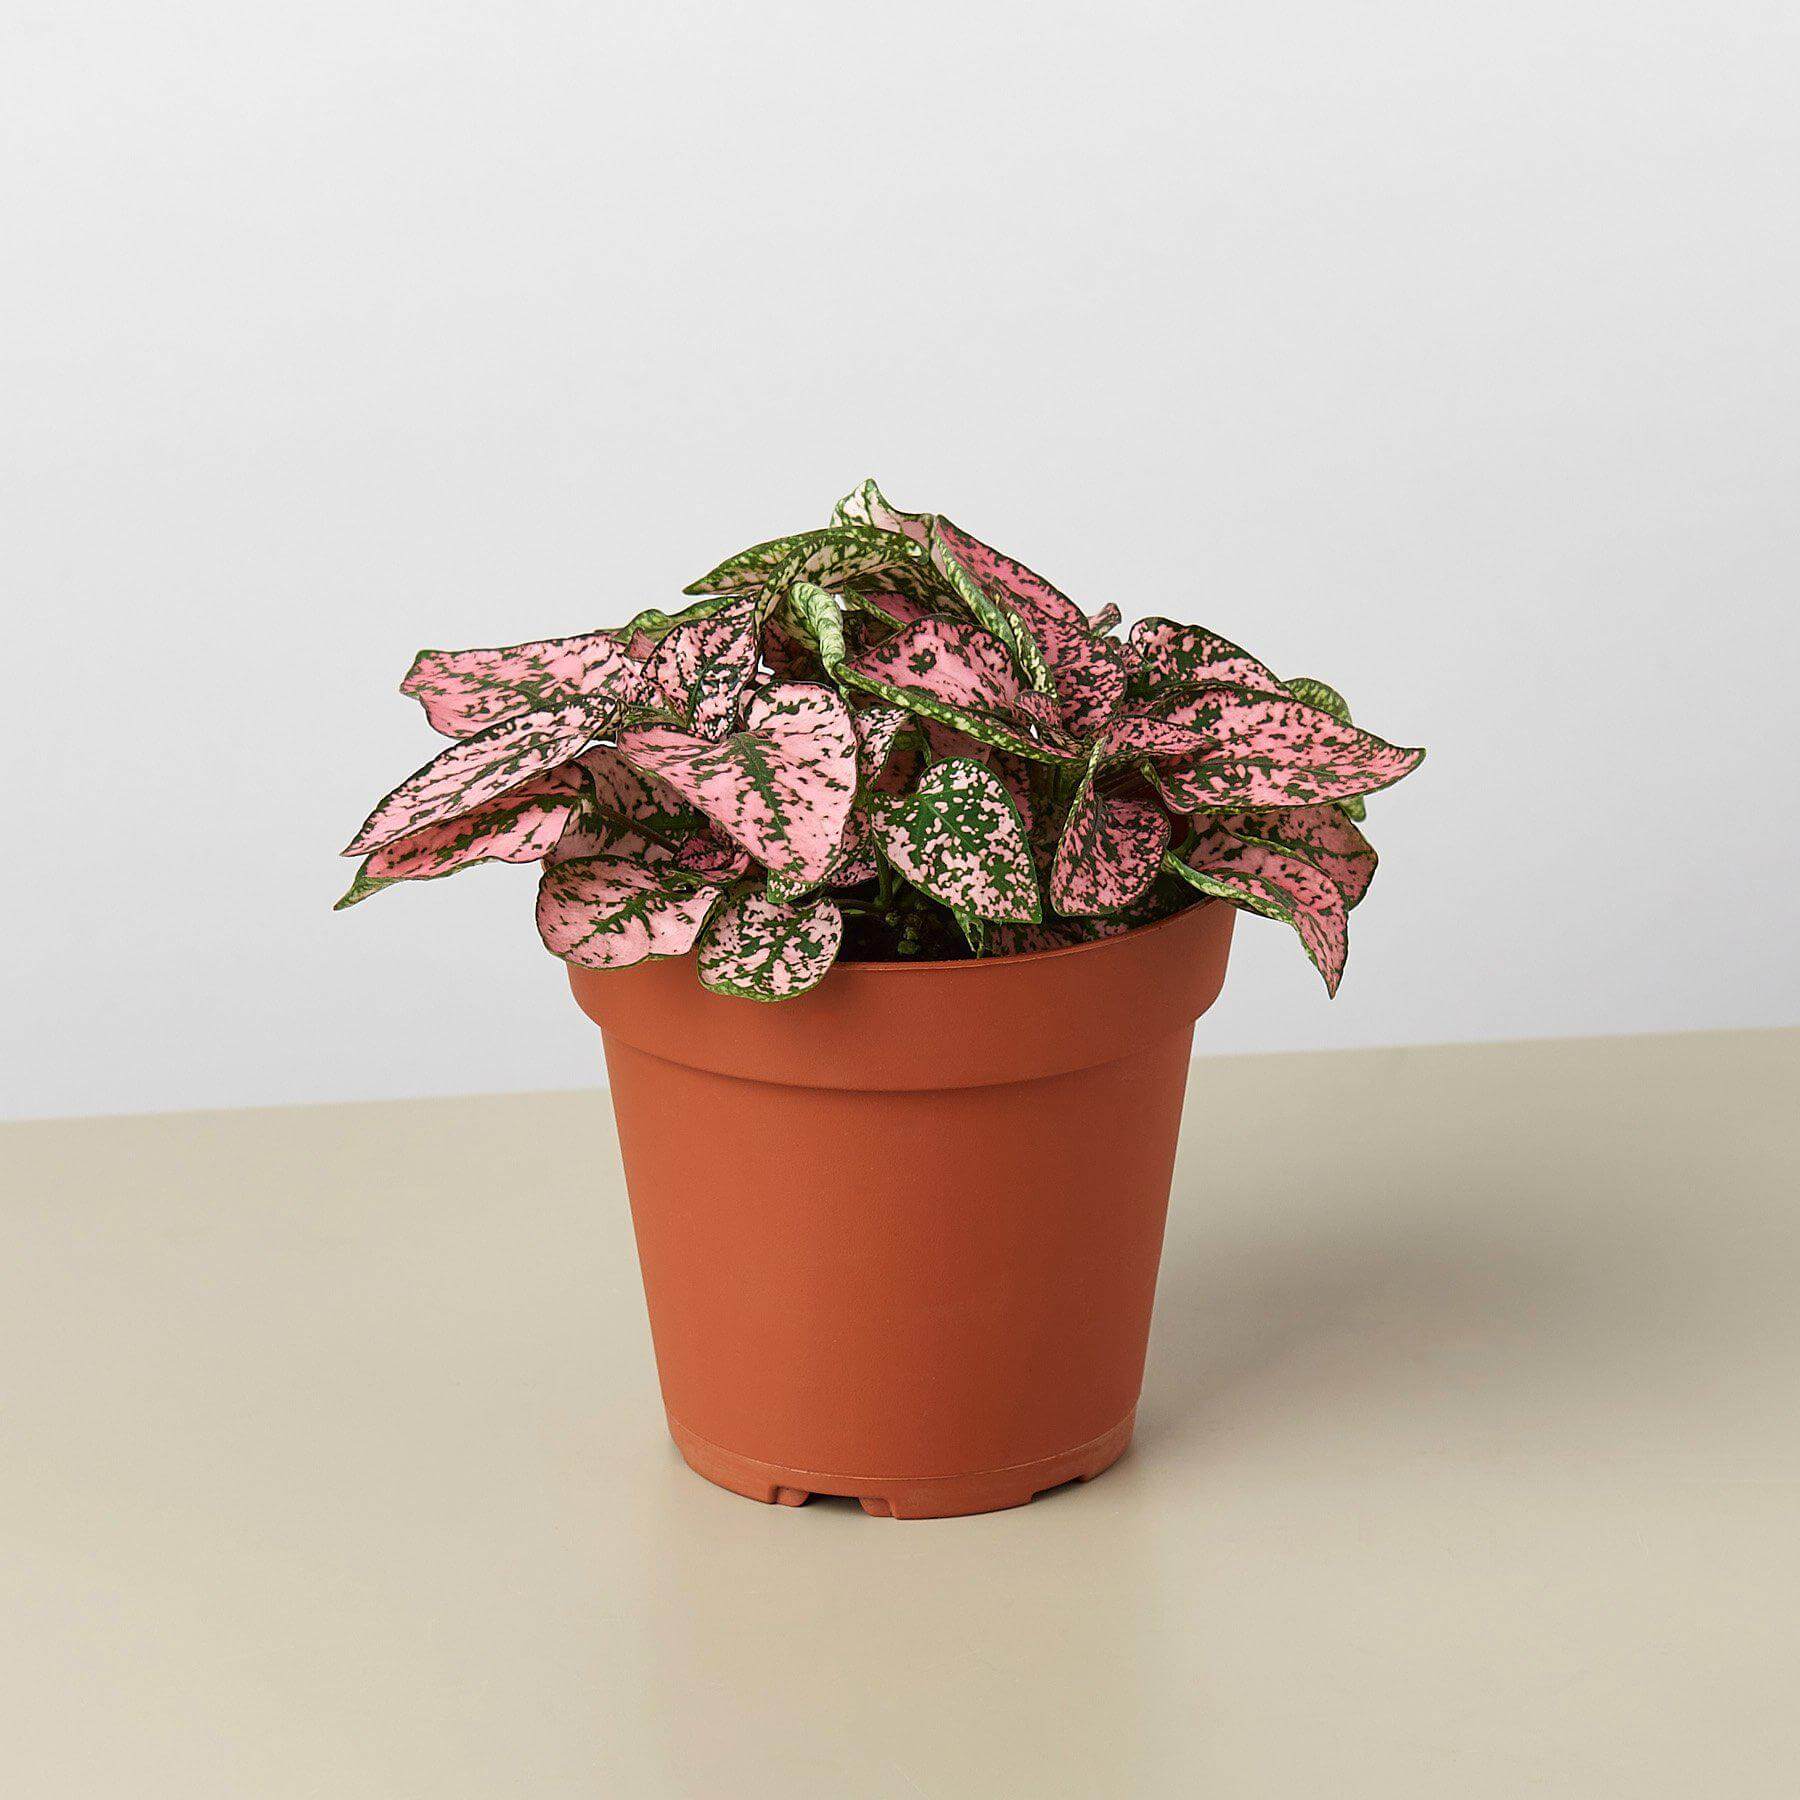 Hypoestes Pink - Polka Dot plant | Modern house plants that clean the air